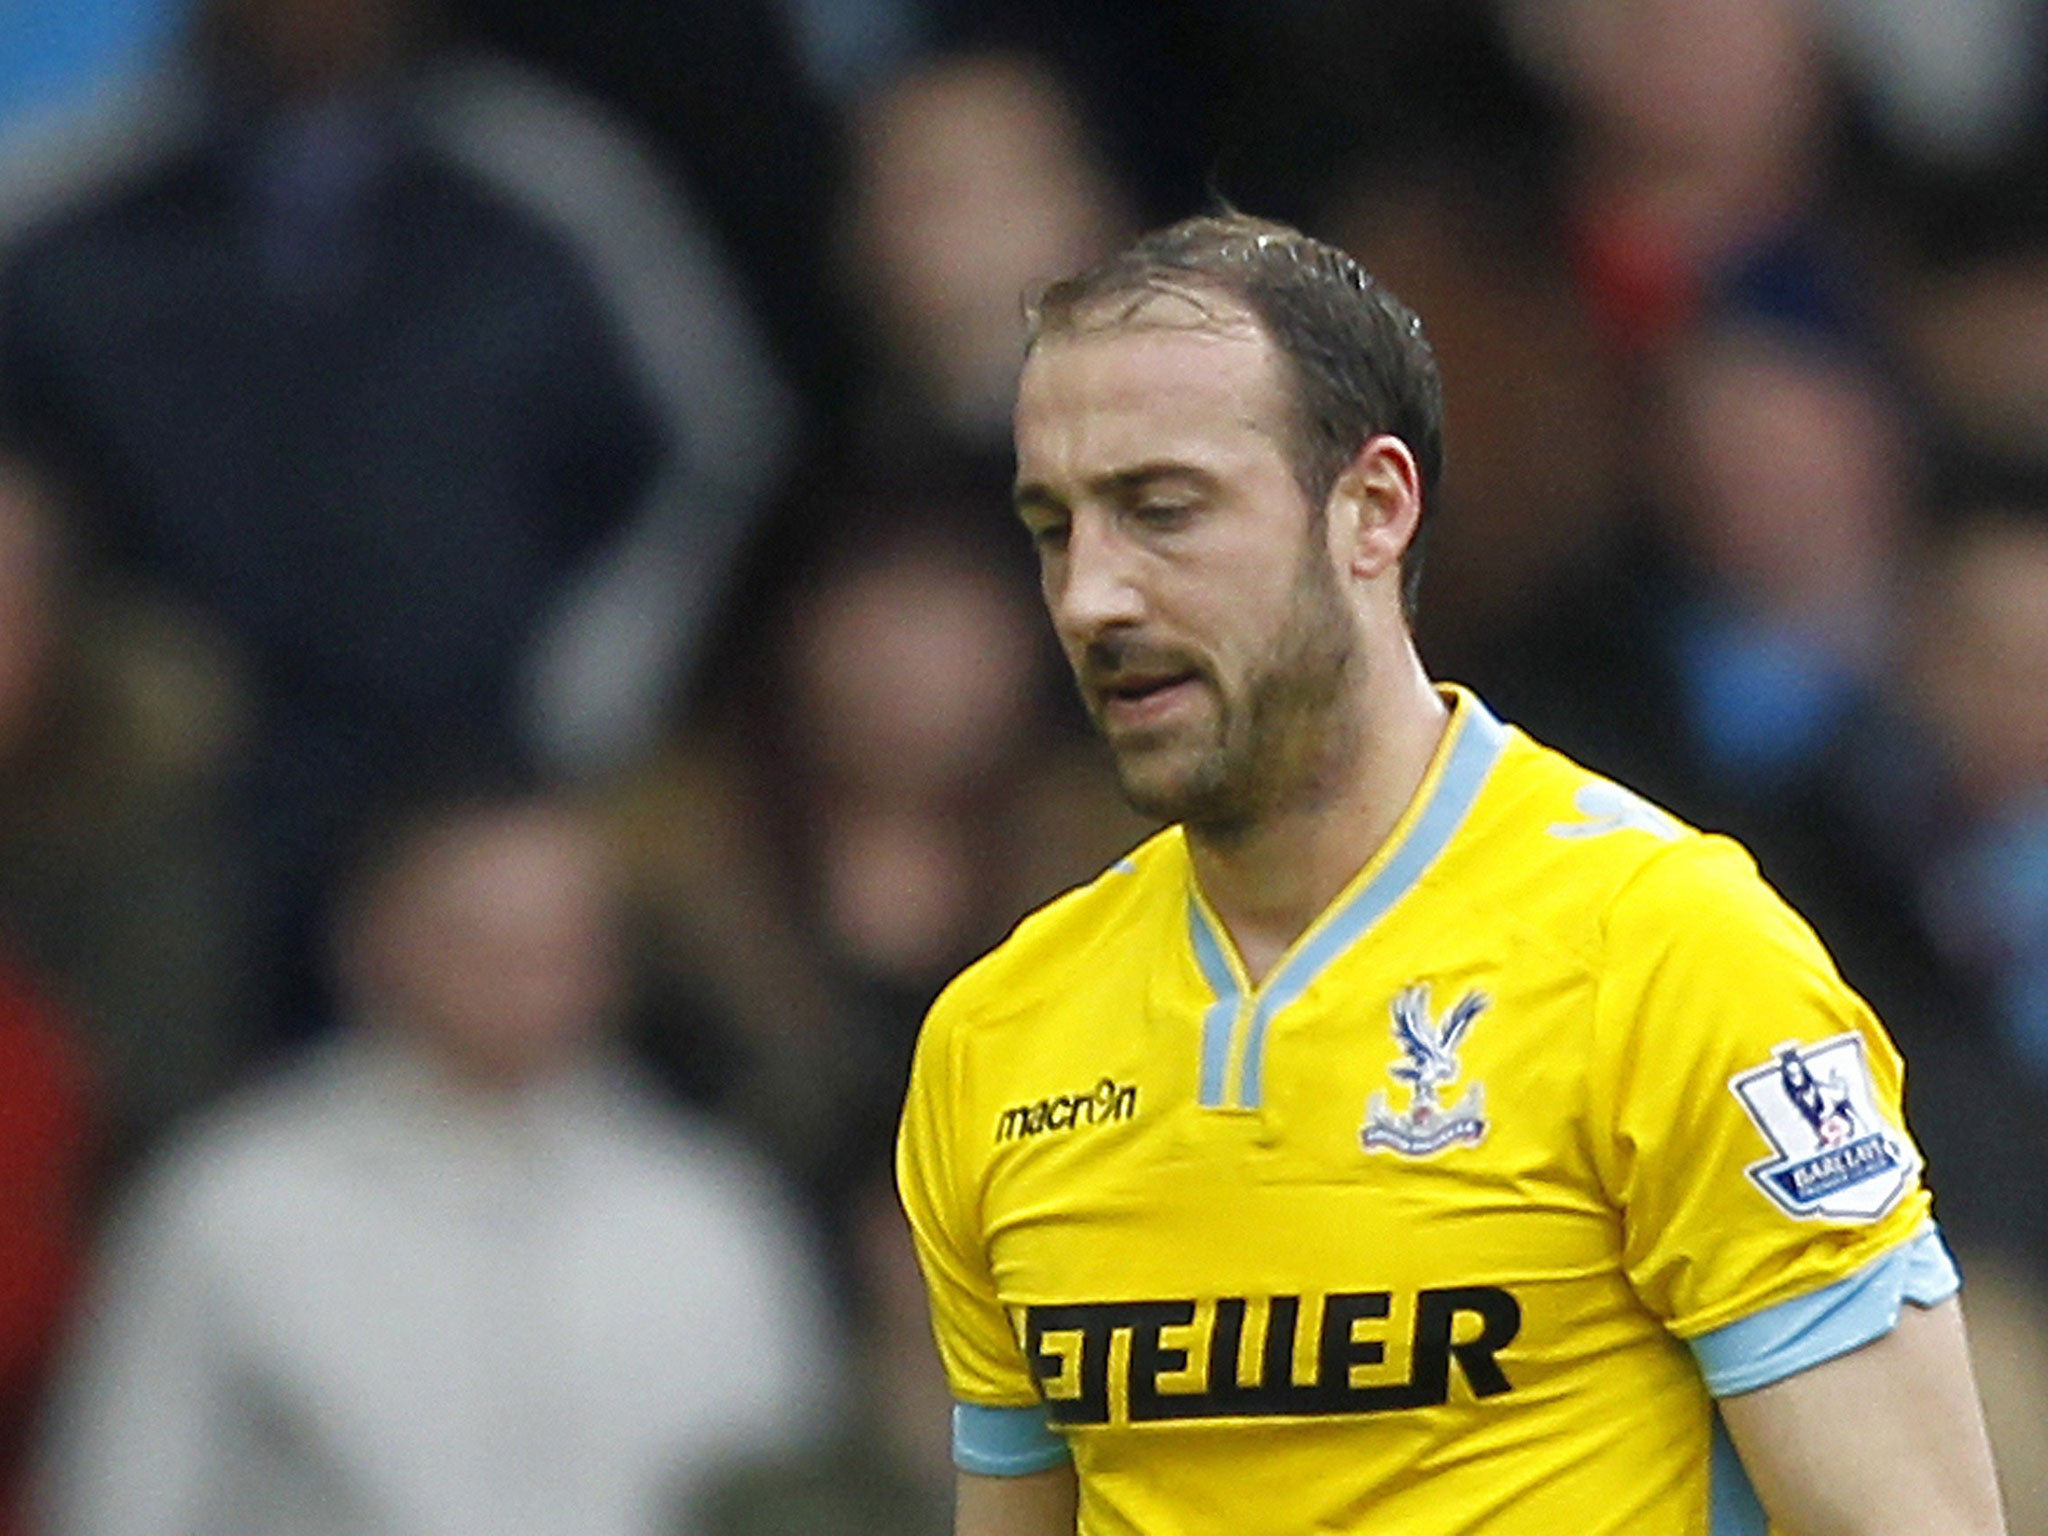 Glenn Murray walks off the pitch after being shown a red card